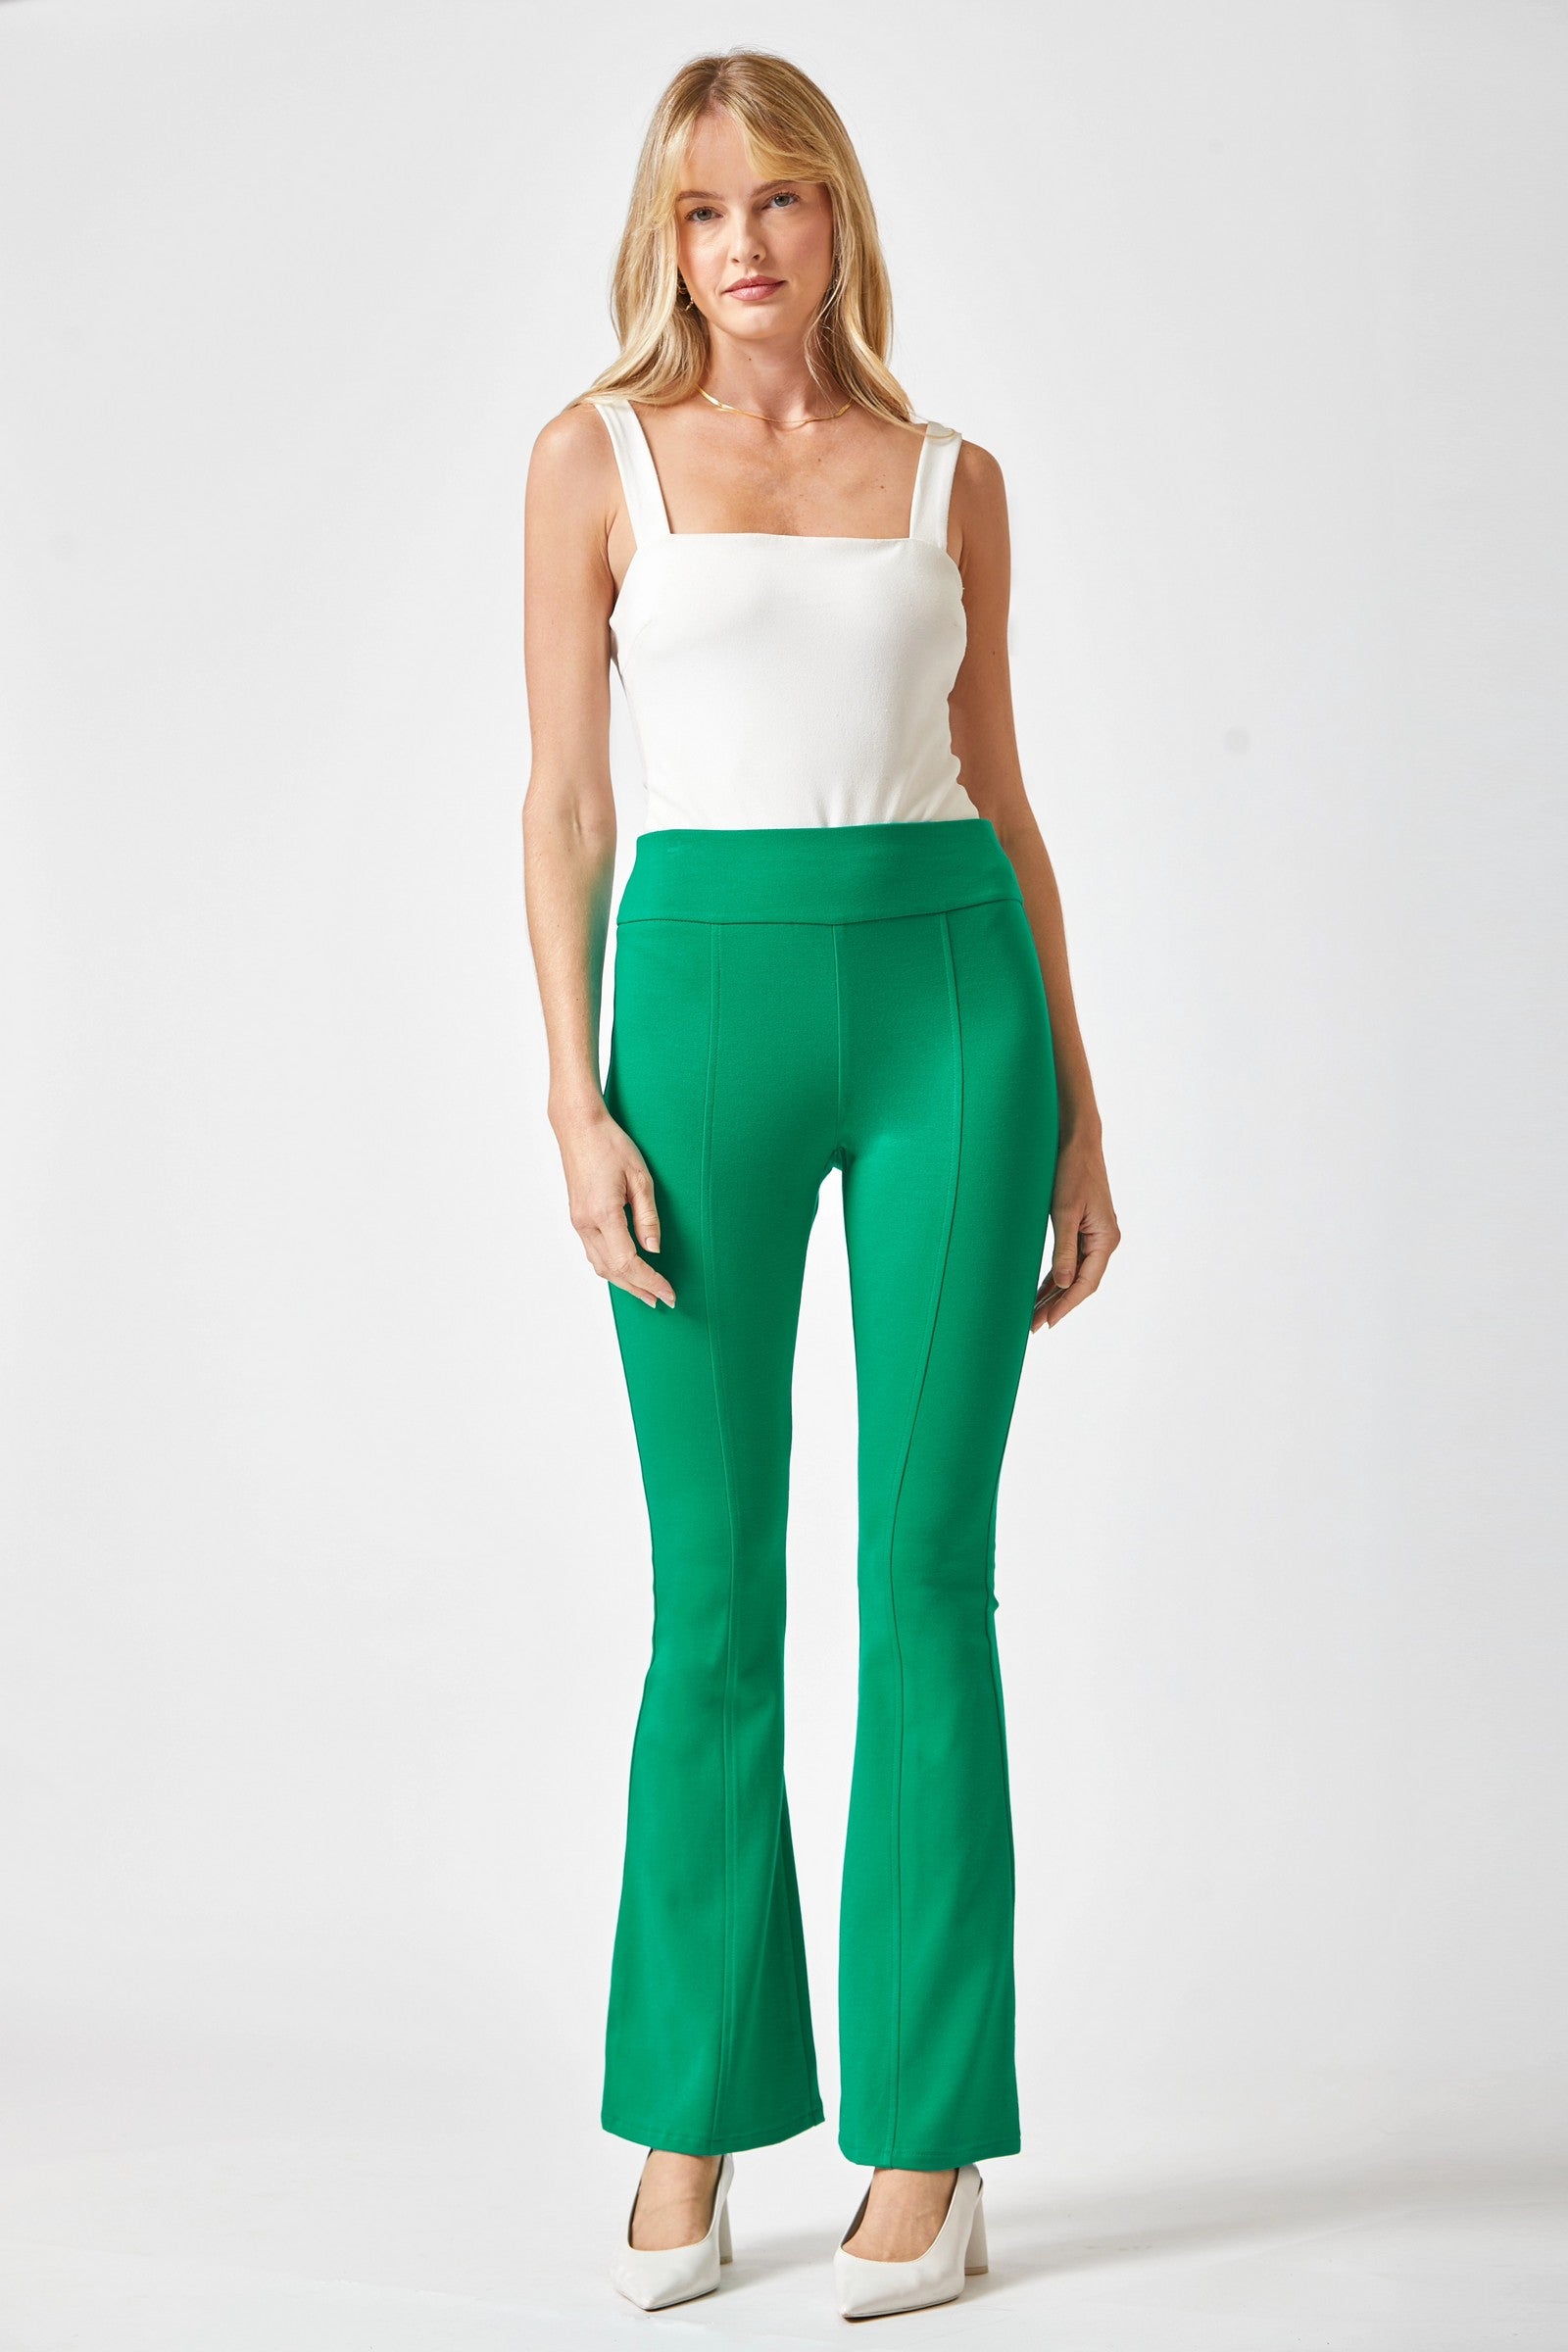 PREORDER: Magic Flare Pants in Eleven Colors - Womens